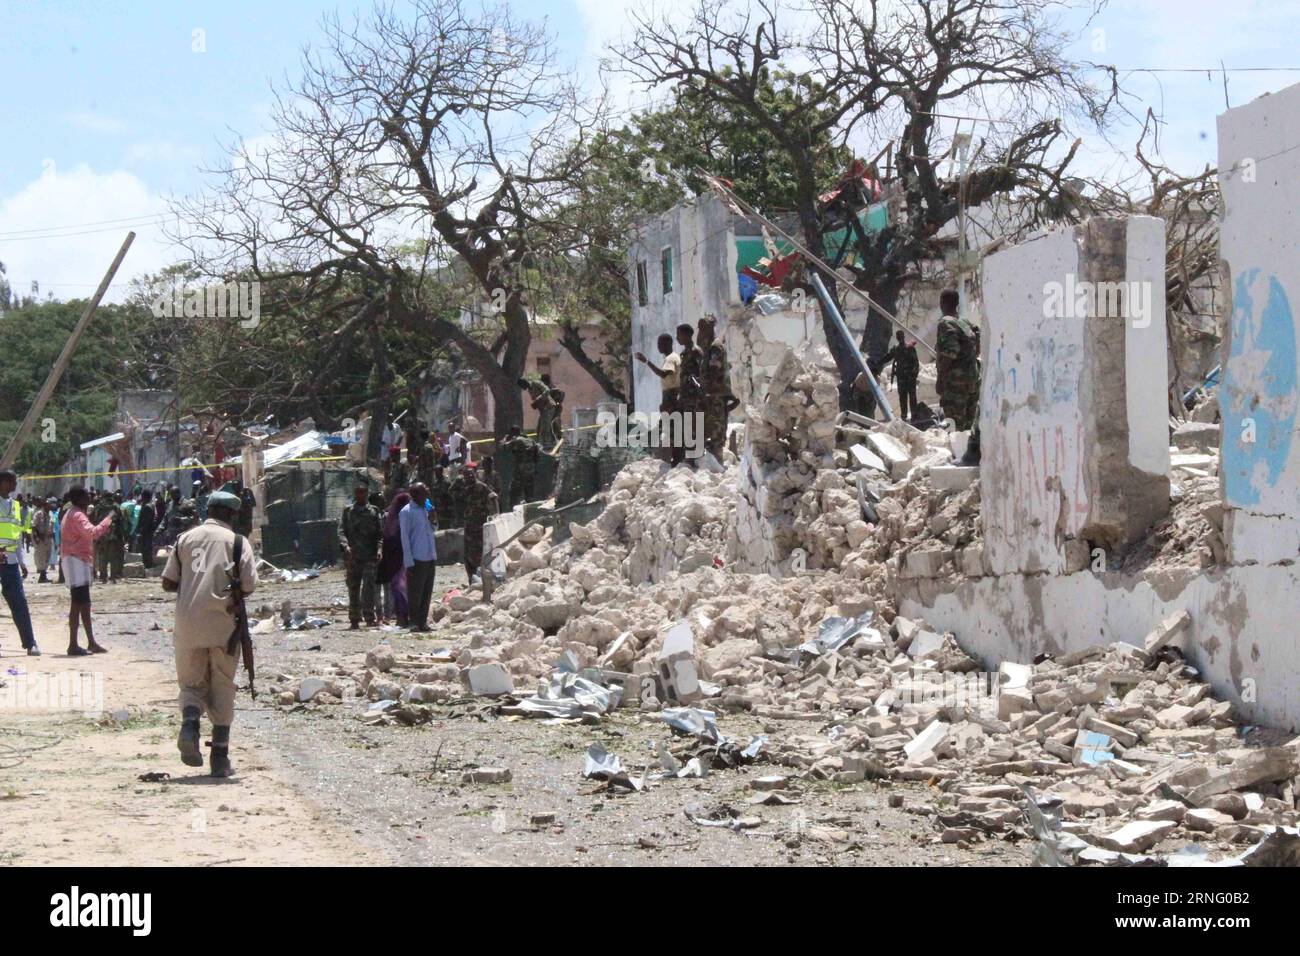 Bombenanschlag in Mogadischu (160830) -- MOGADISHU, Aug. 30, 2016 -- Photo taken on Aug. 30, 2016 shows a scene of the explosion site in Mogadishu, capital of Somalia. At least seven people were killed and several others injured in a bomb explosion that hit a popular hotel in Mogadishu on Tuesday, police have confirmed. ) (syq) SOMALIA-MOGADISHU-EXPLOSION FaisalxIsse PUBLICATIONxNOTxINxCHN   Bombing in Mogadishu 160830 Mogadishu Aug 30 2016 Photo Taken ON Aug 30 2016 Shows a Scene of The Explosion Site in Mogadishu Capital of Somalia AT least Seven Celebrities Were KILLED and several Others In Stock Photo